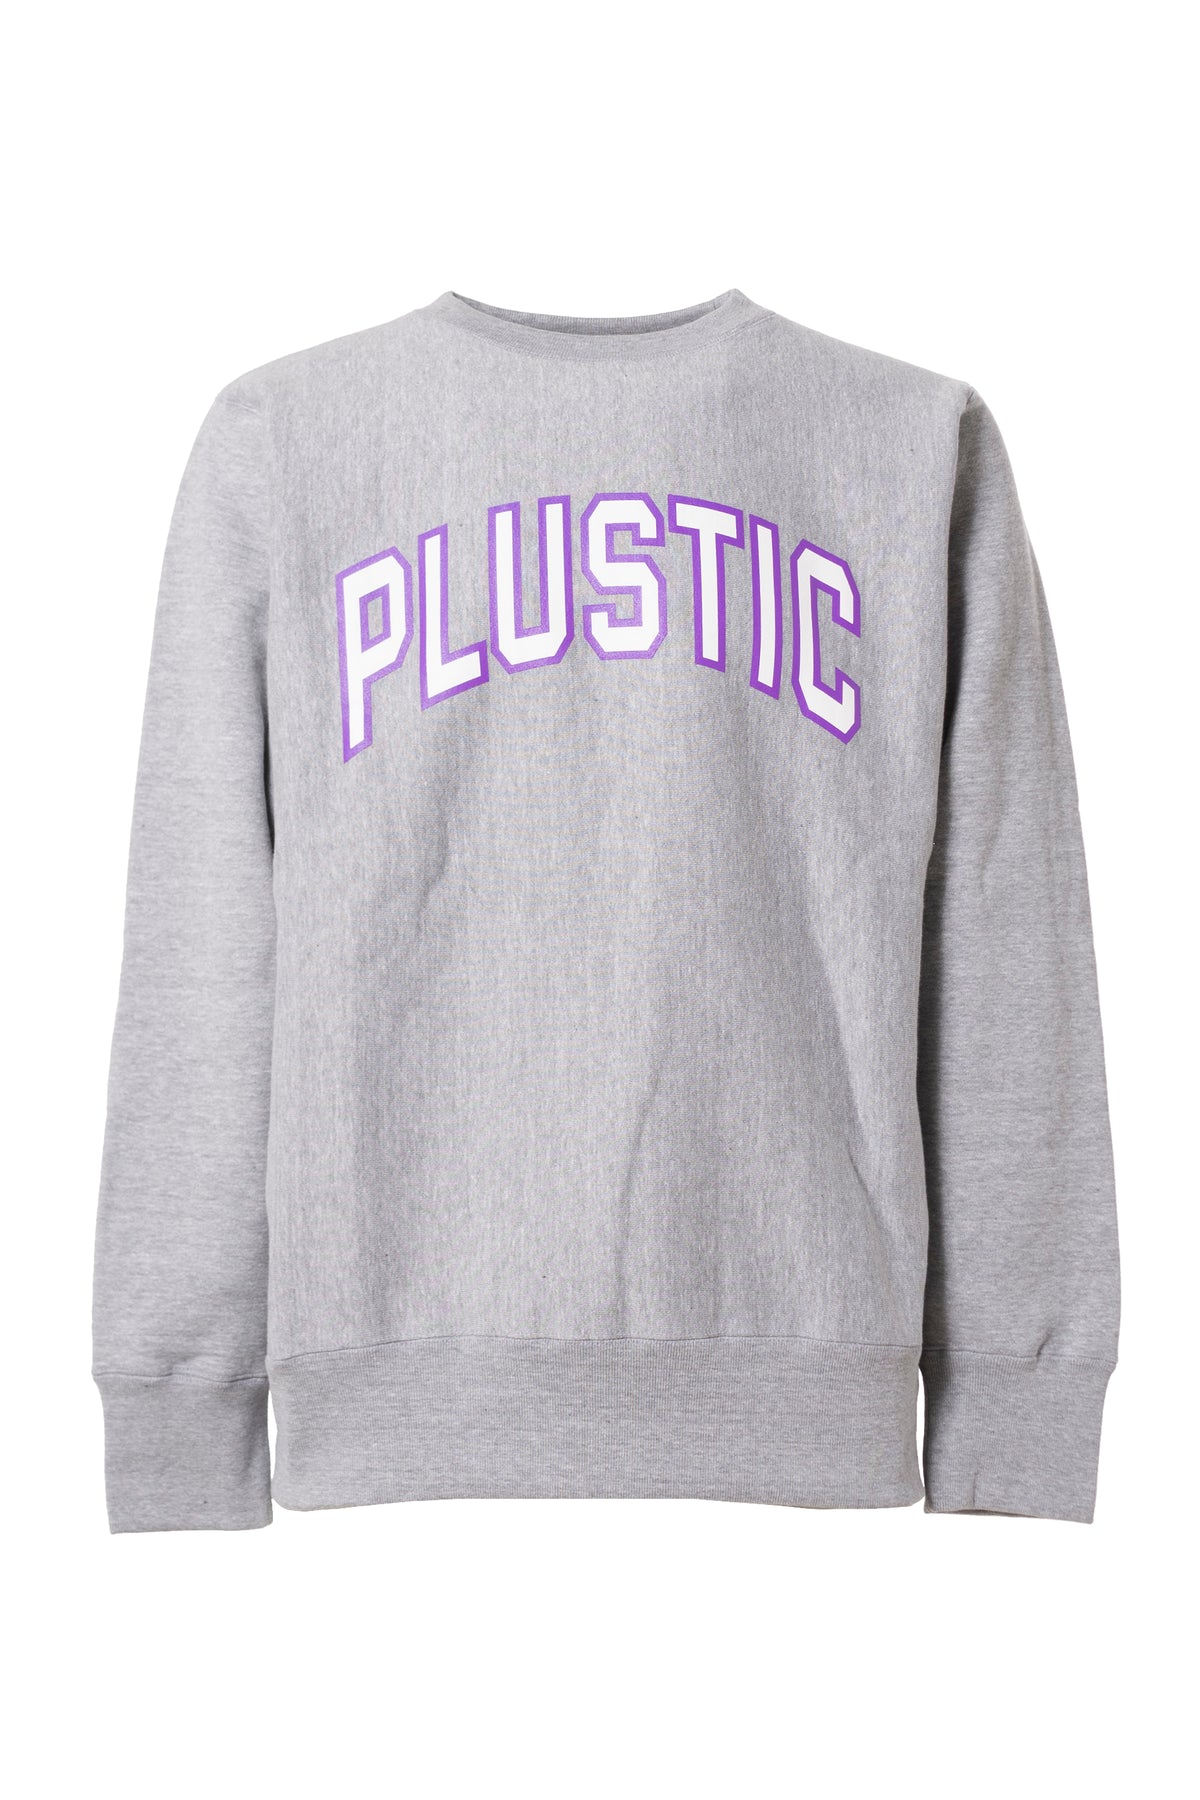 Plusticview COLLEGE LOGO SWEATER  / GRY